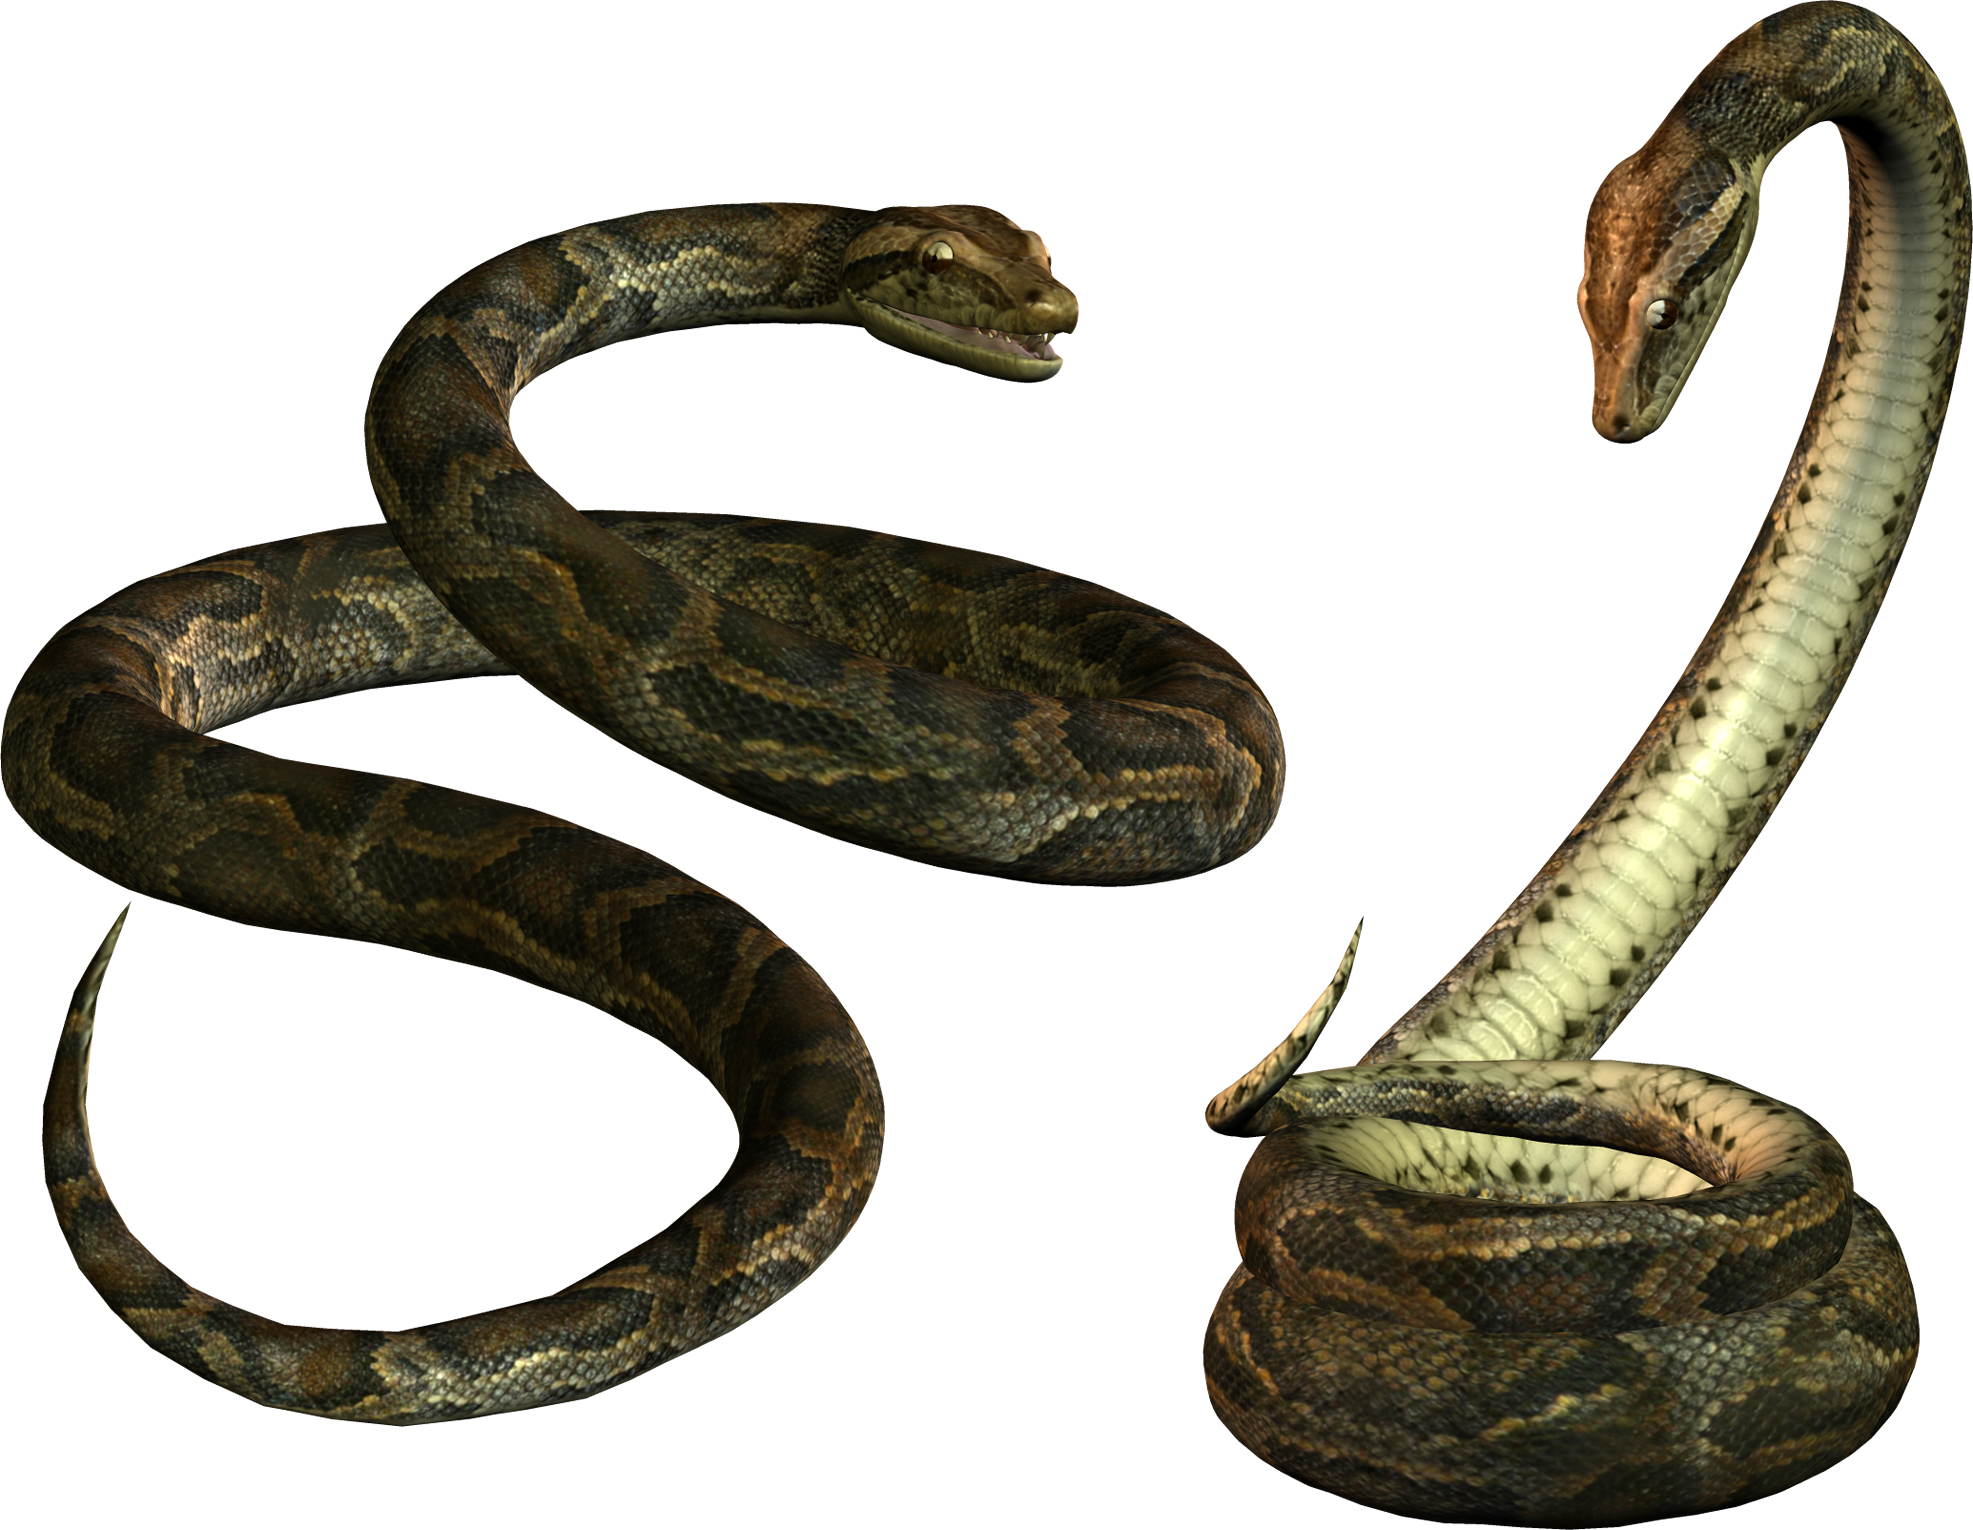 Python Snake Png - Snake Png Image Picture Download Free, Transparent background PNG HD thumbnail